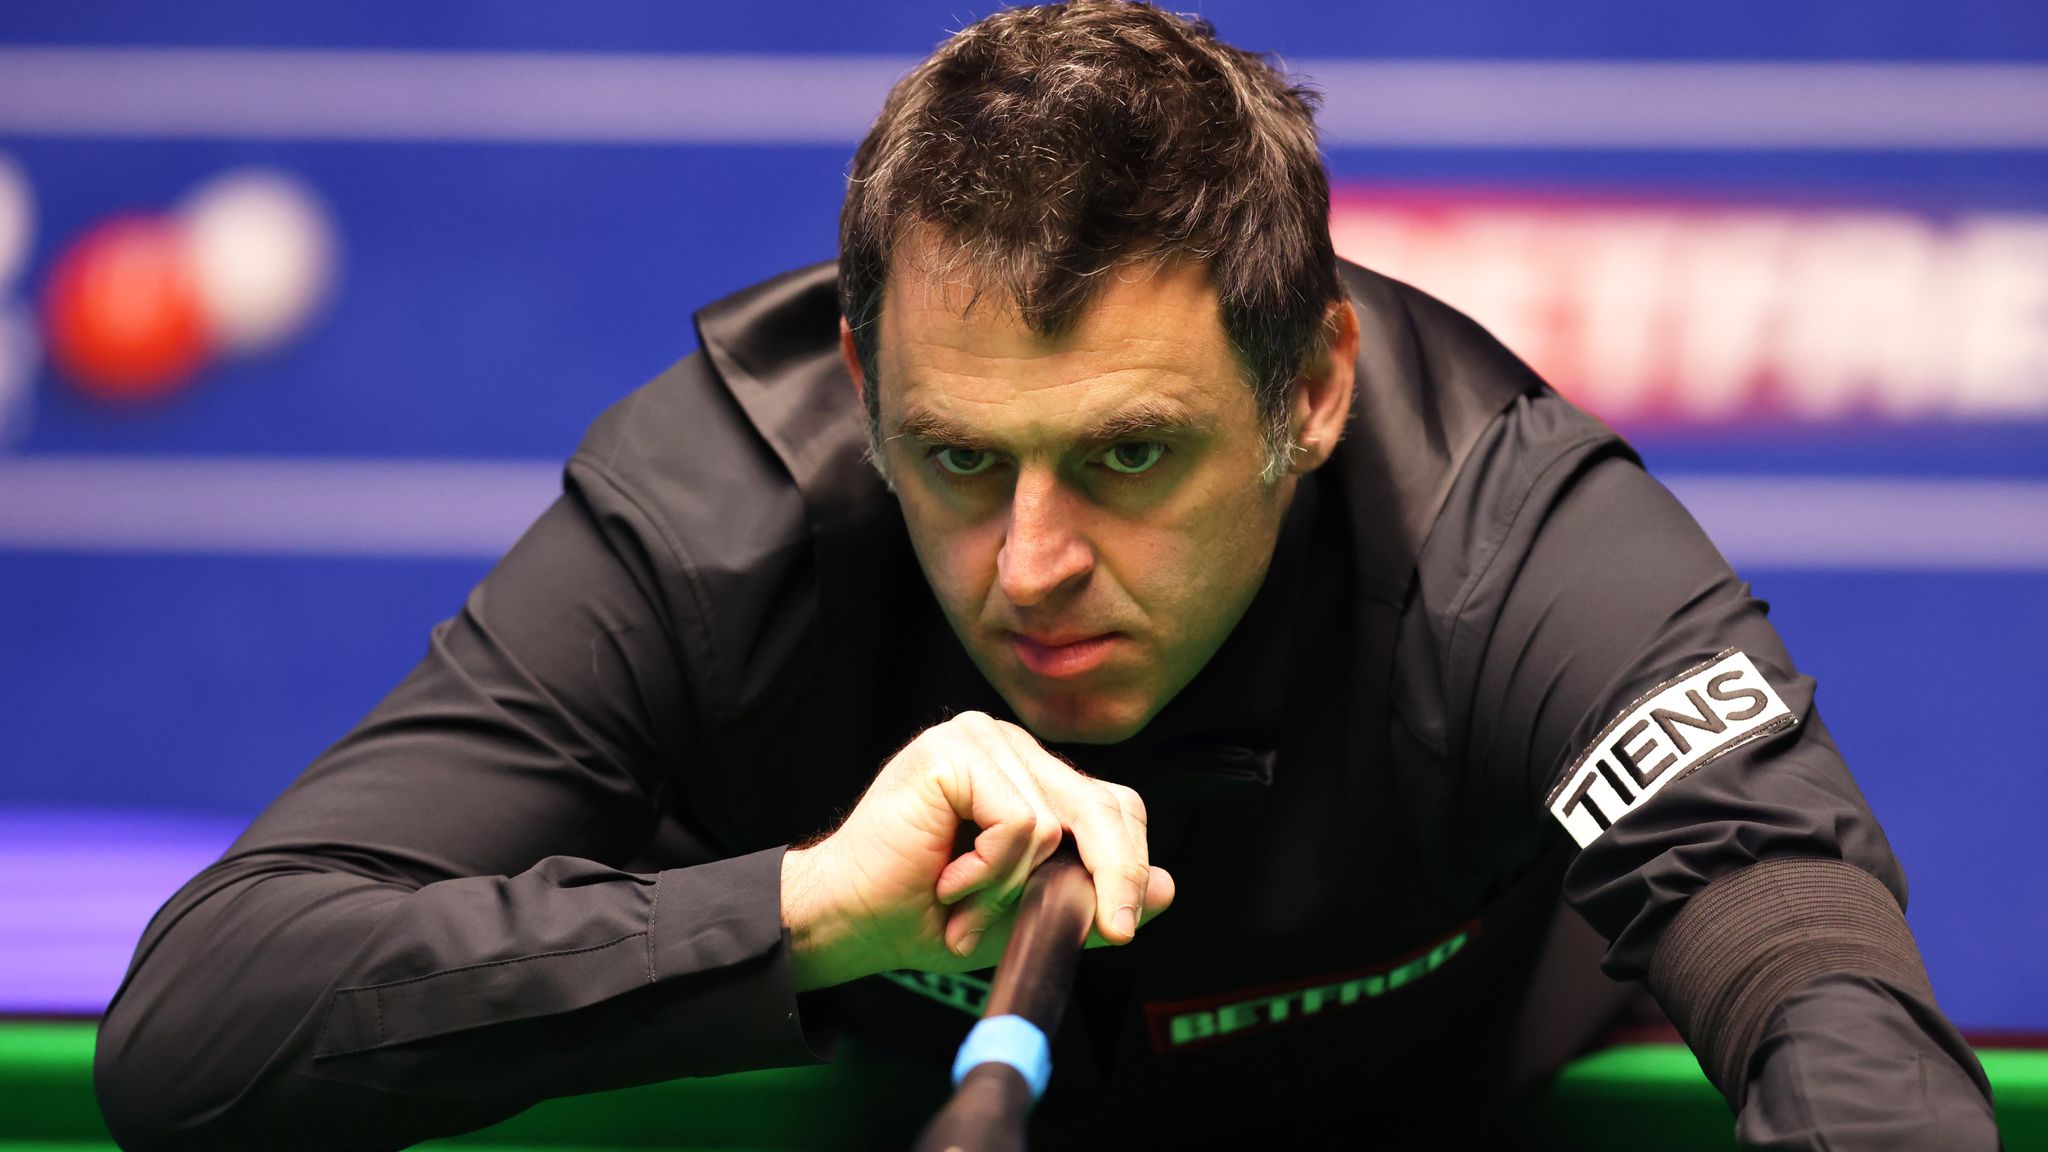 Ronnie OSullivan beats Mark Joyce in World Snooker Championship with fans back at Crucible Snooker News Sky Sports